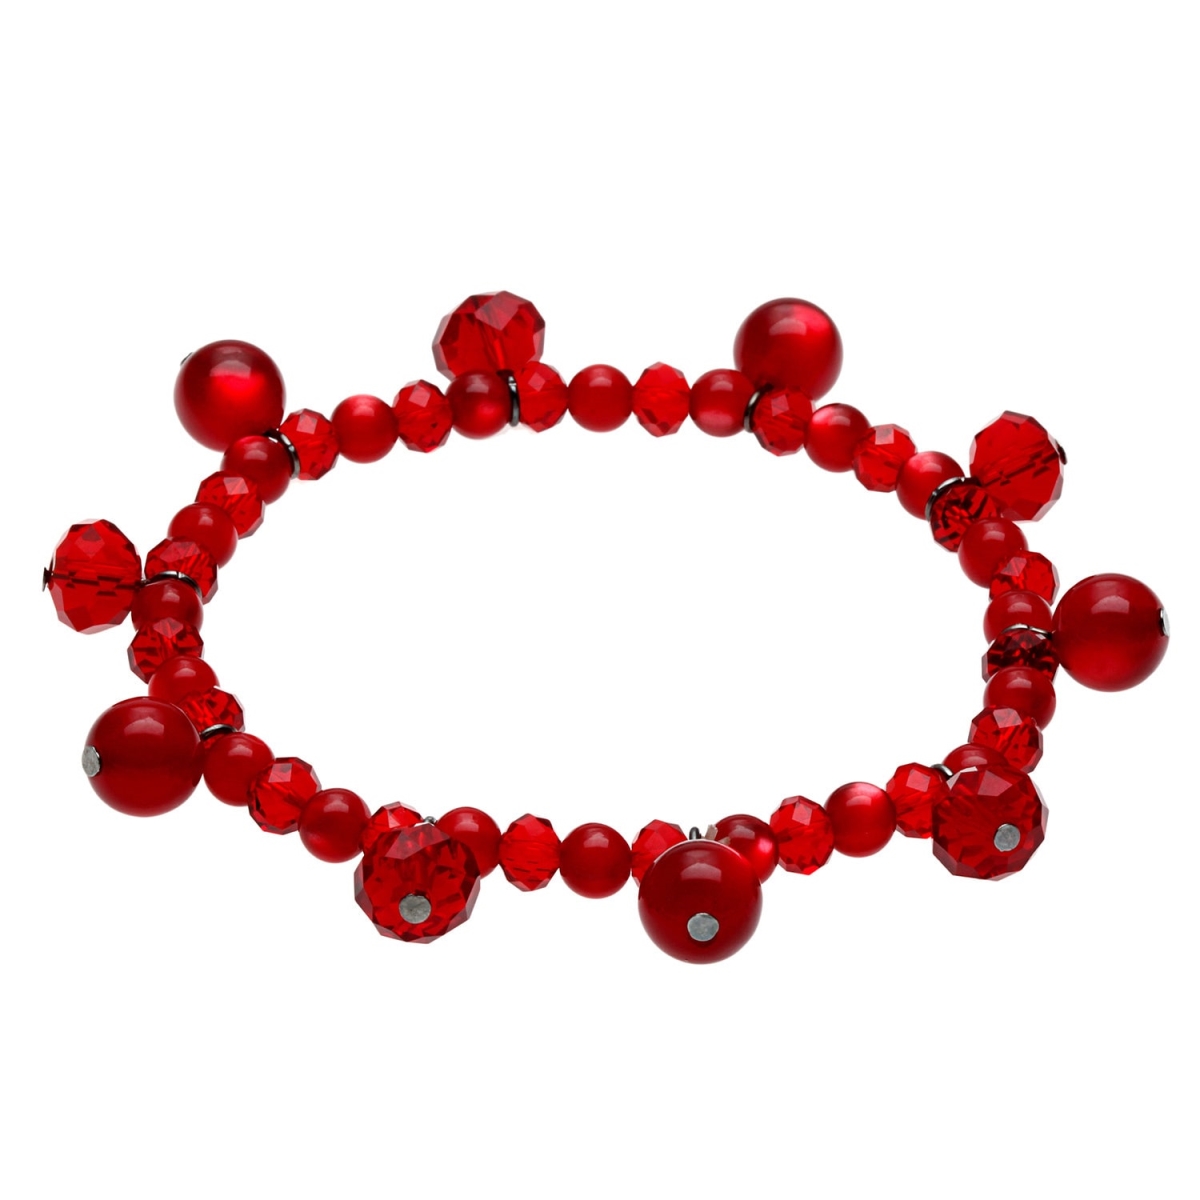 Picture of Alexa Starr 5307-BX Red Faceted Glass and Catseye Bead Bracelet